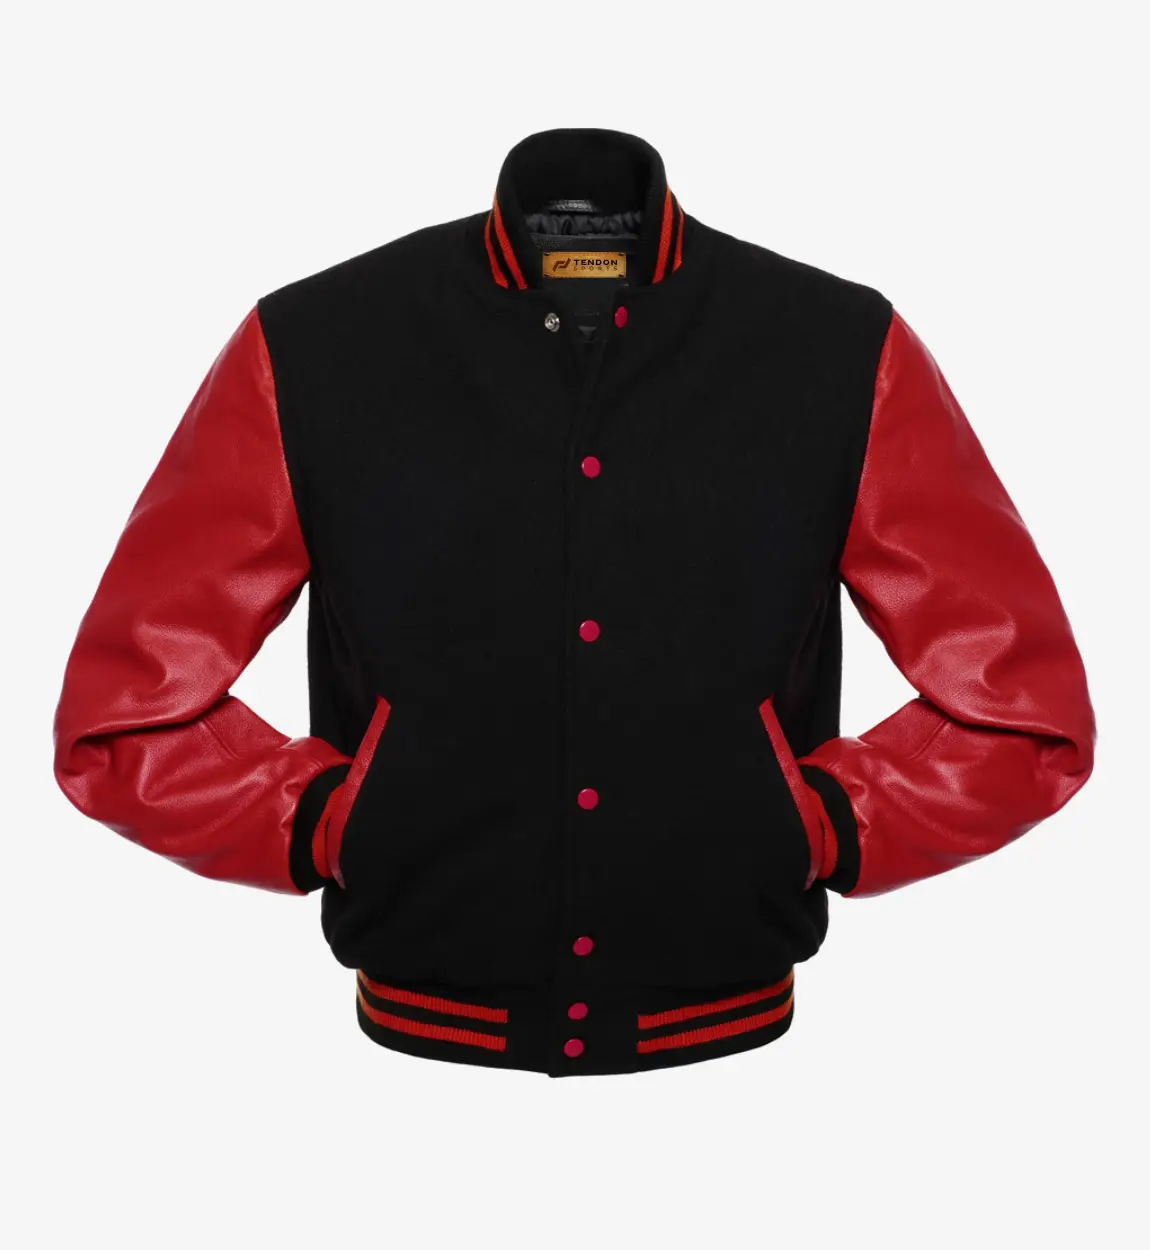 Tendon Sports Varsity Jacket black wool and red leather arms